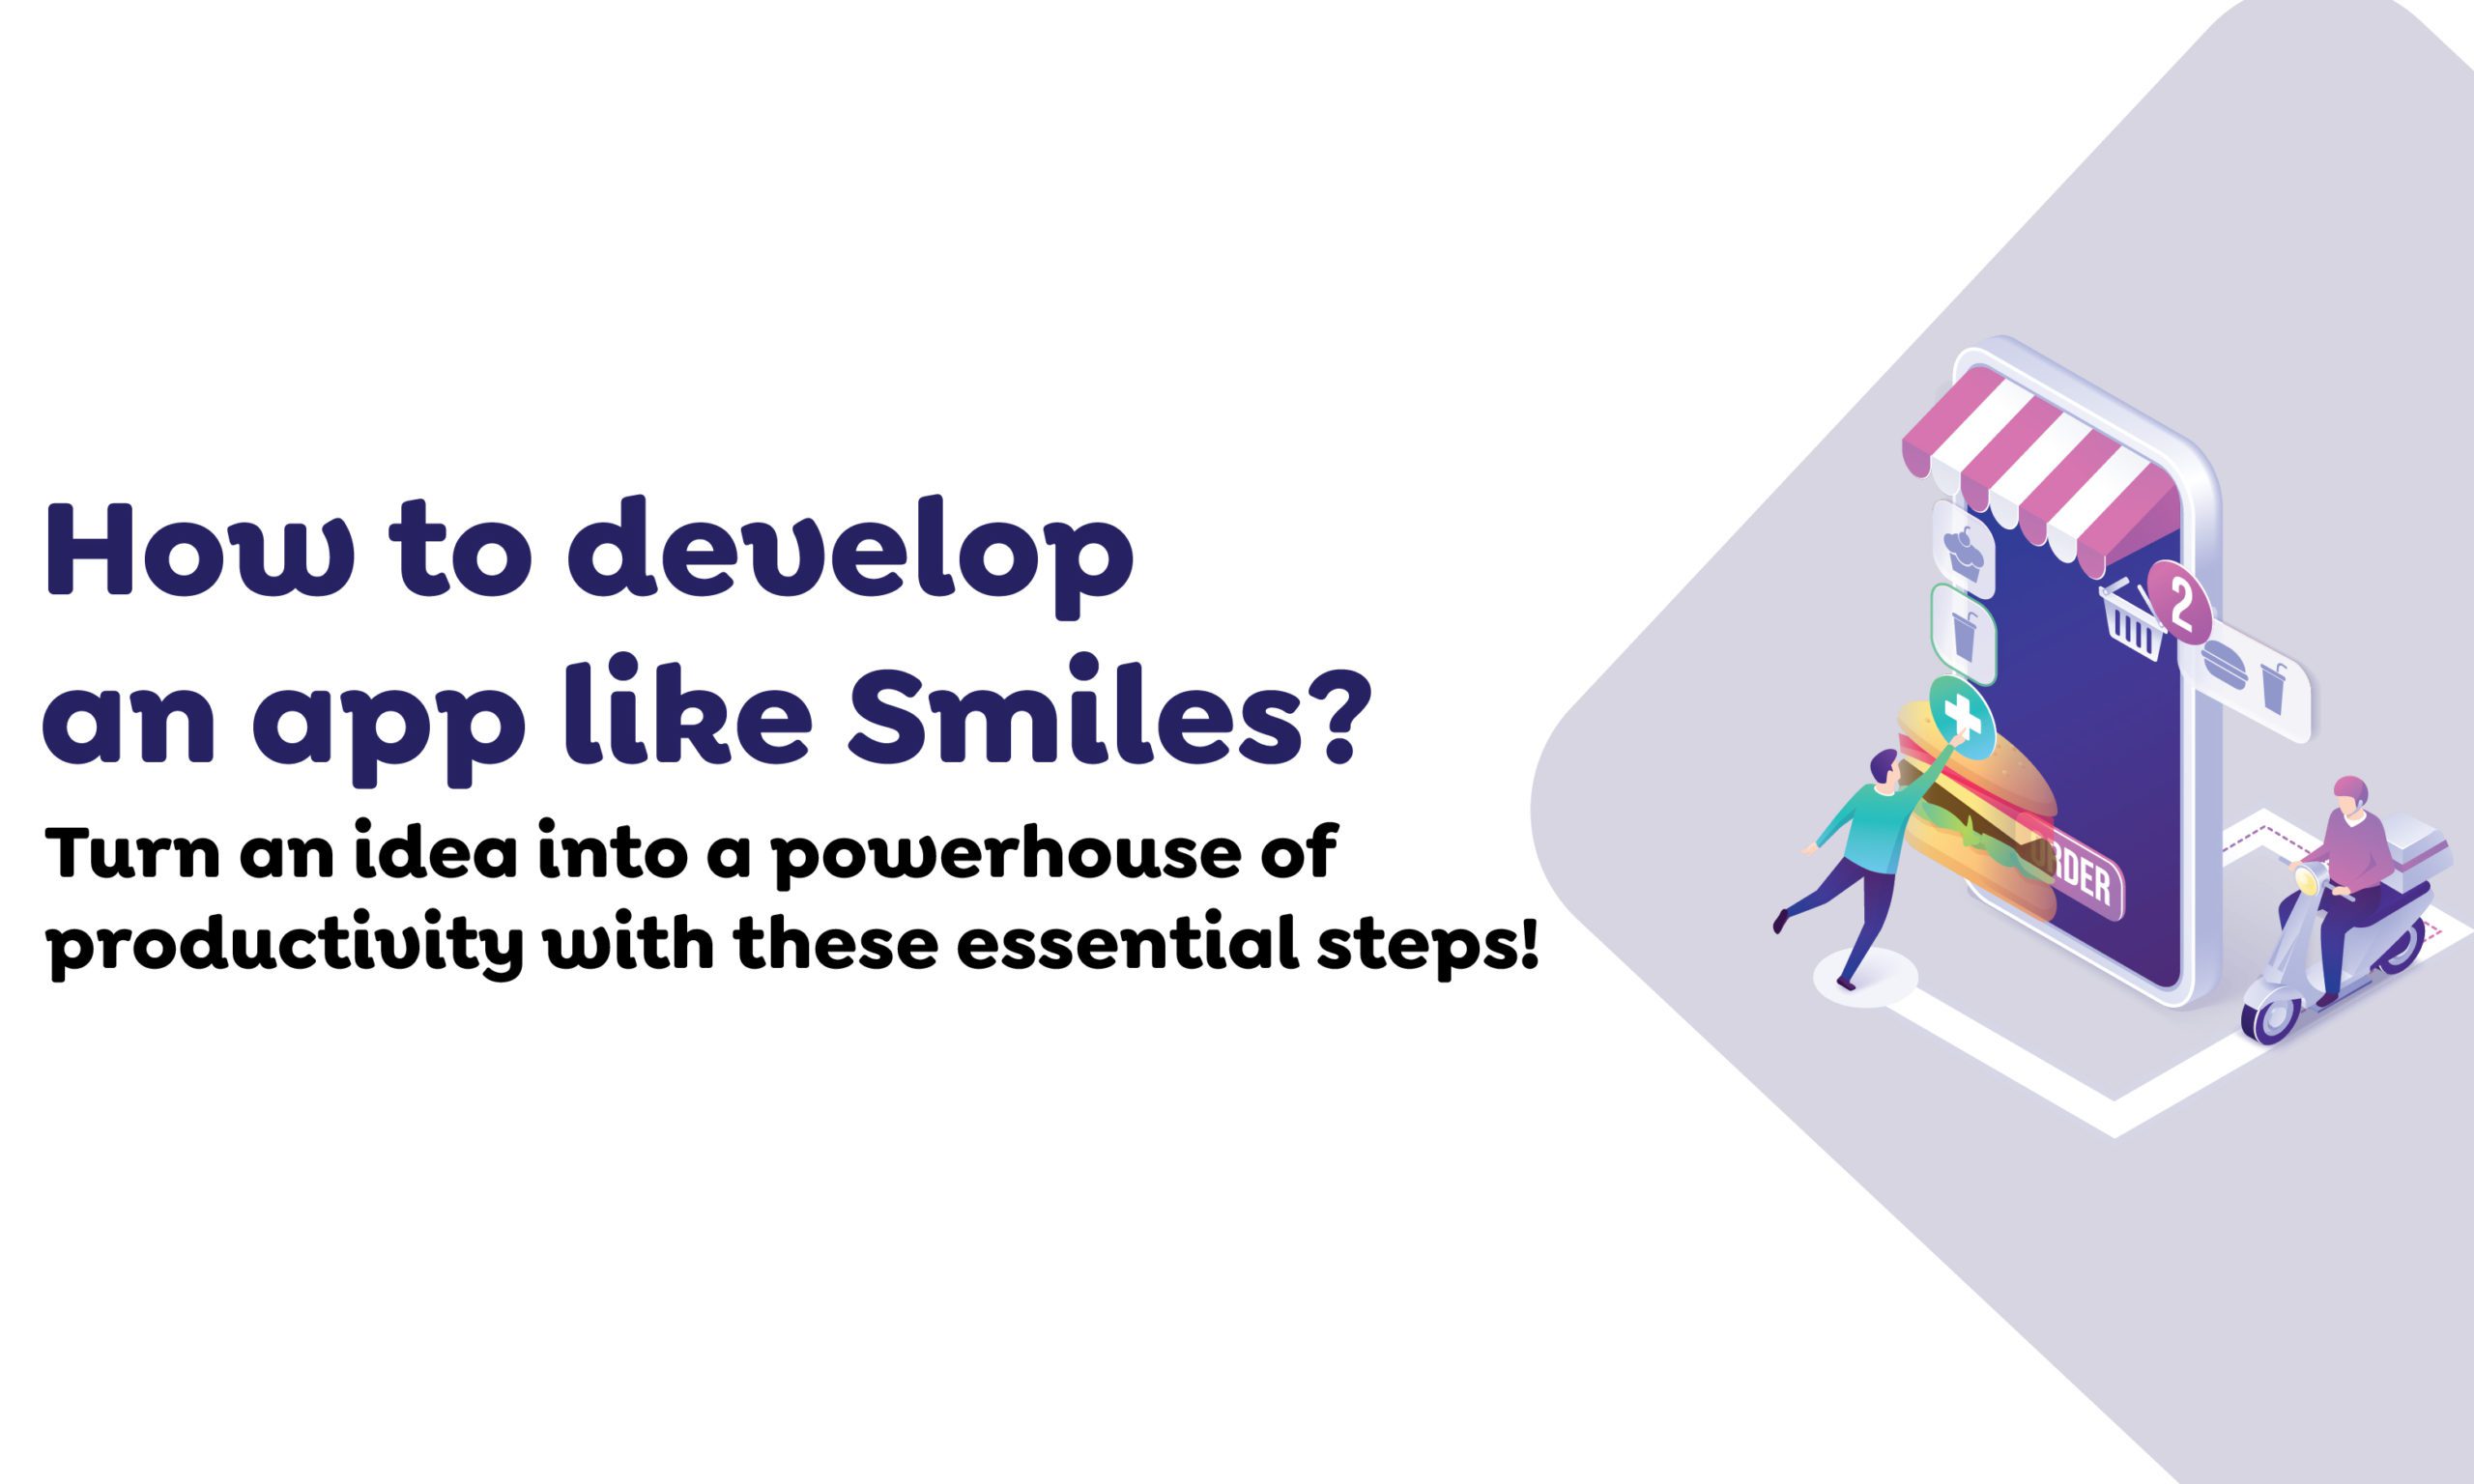 How to develop an app like Smiles